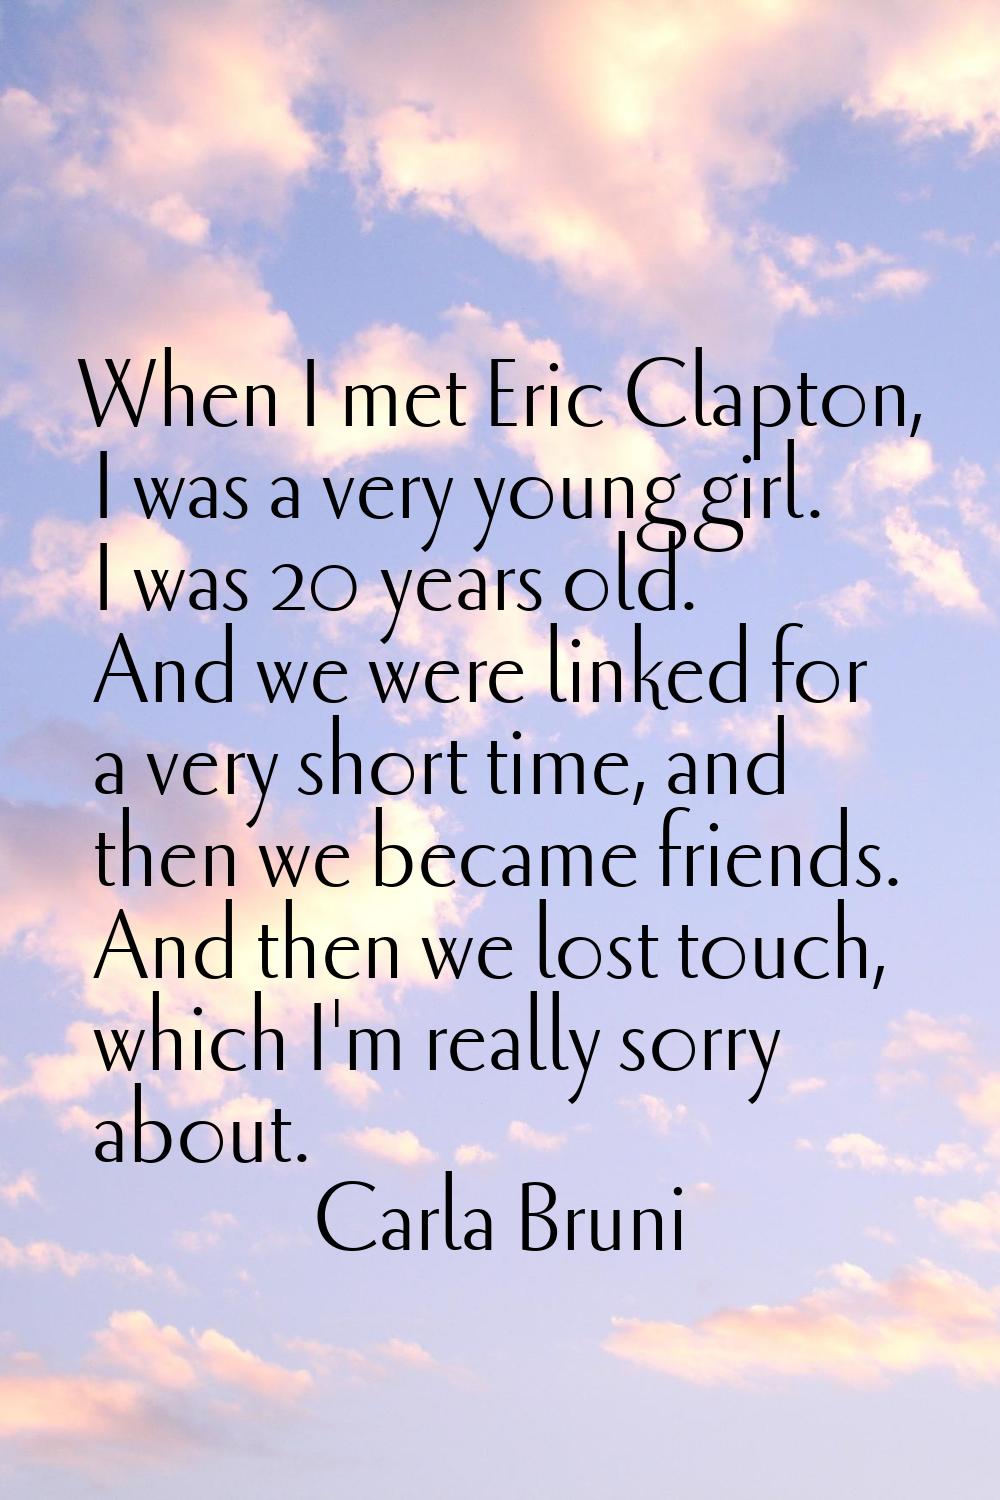 When I met Eric Clapton, I was a very young girl. I was 20 years old. And we were linked for a very